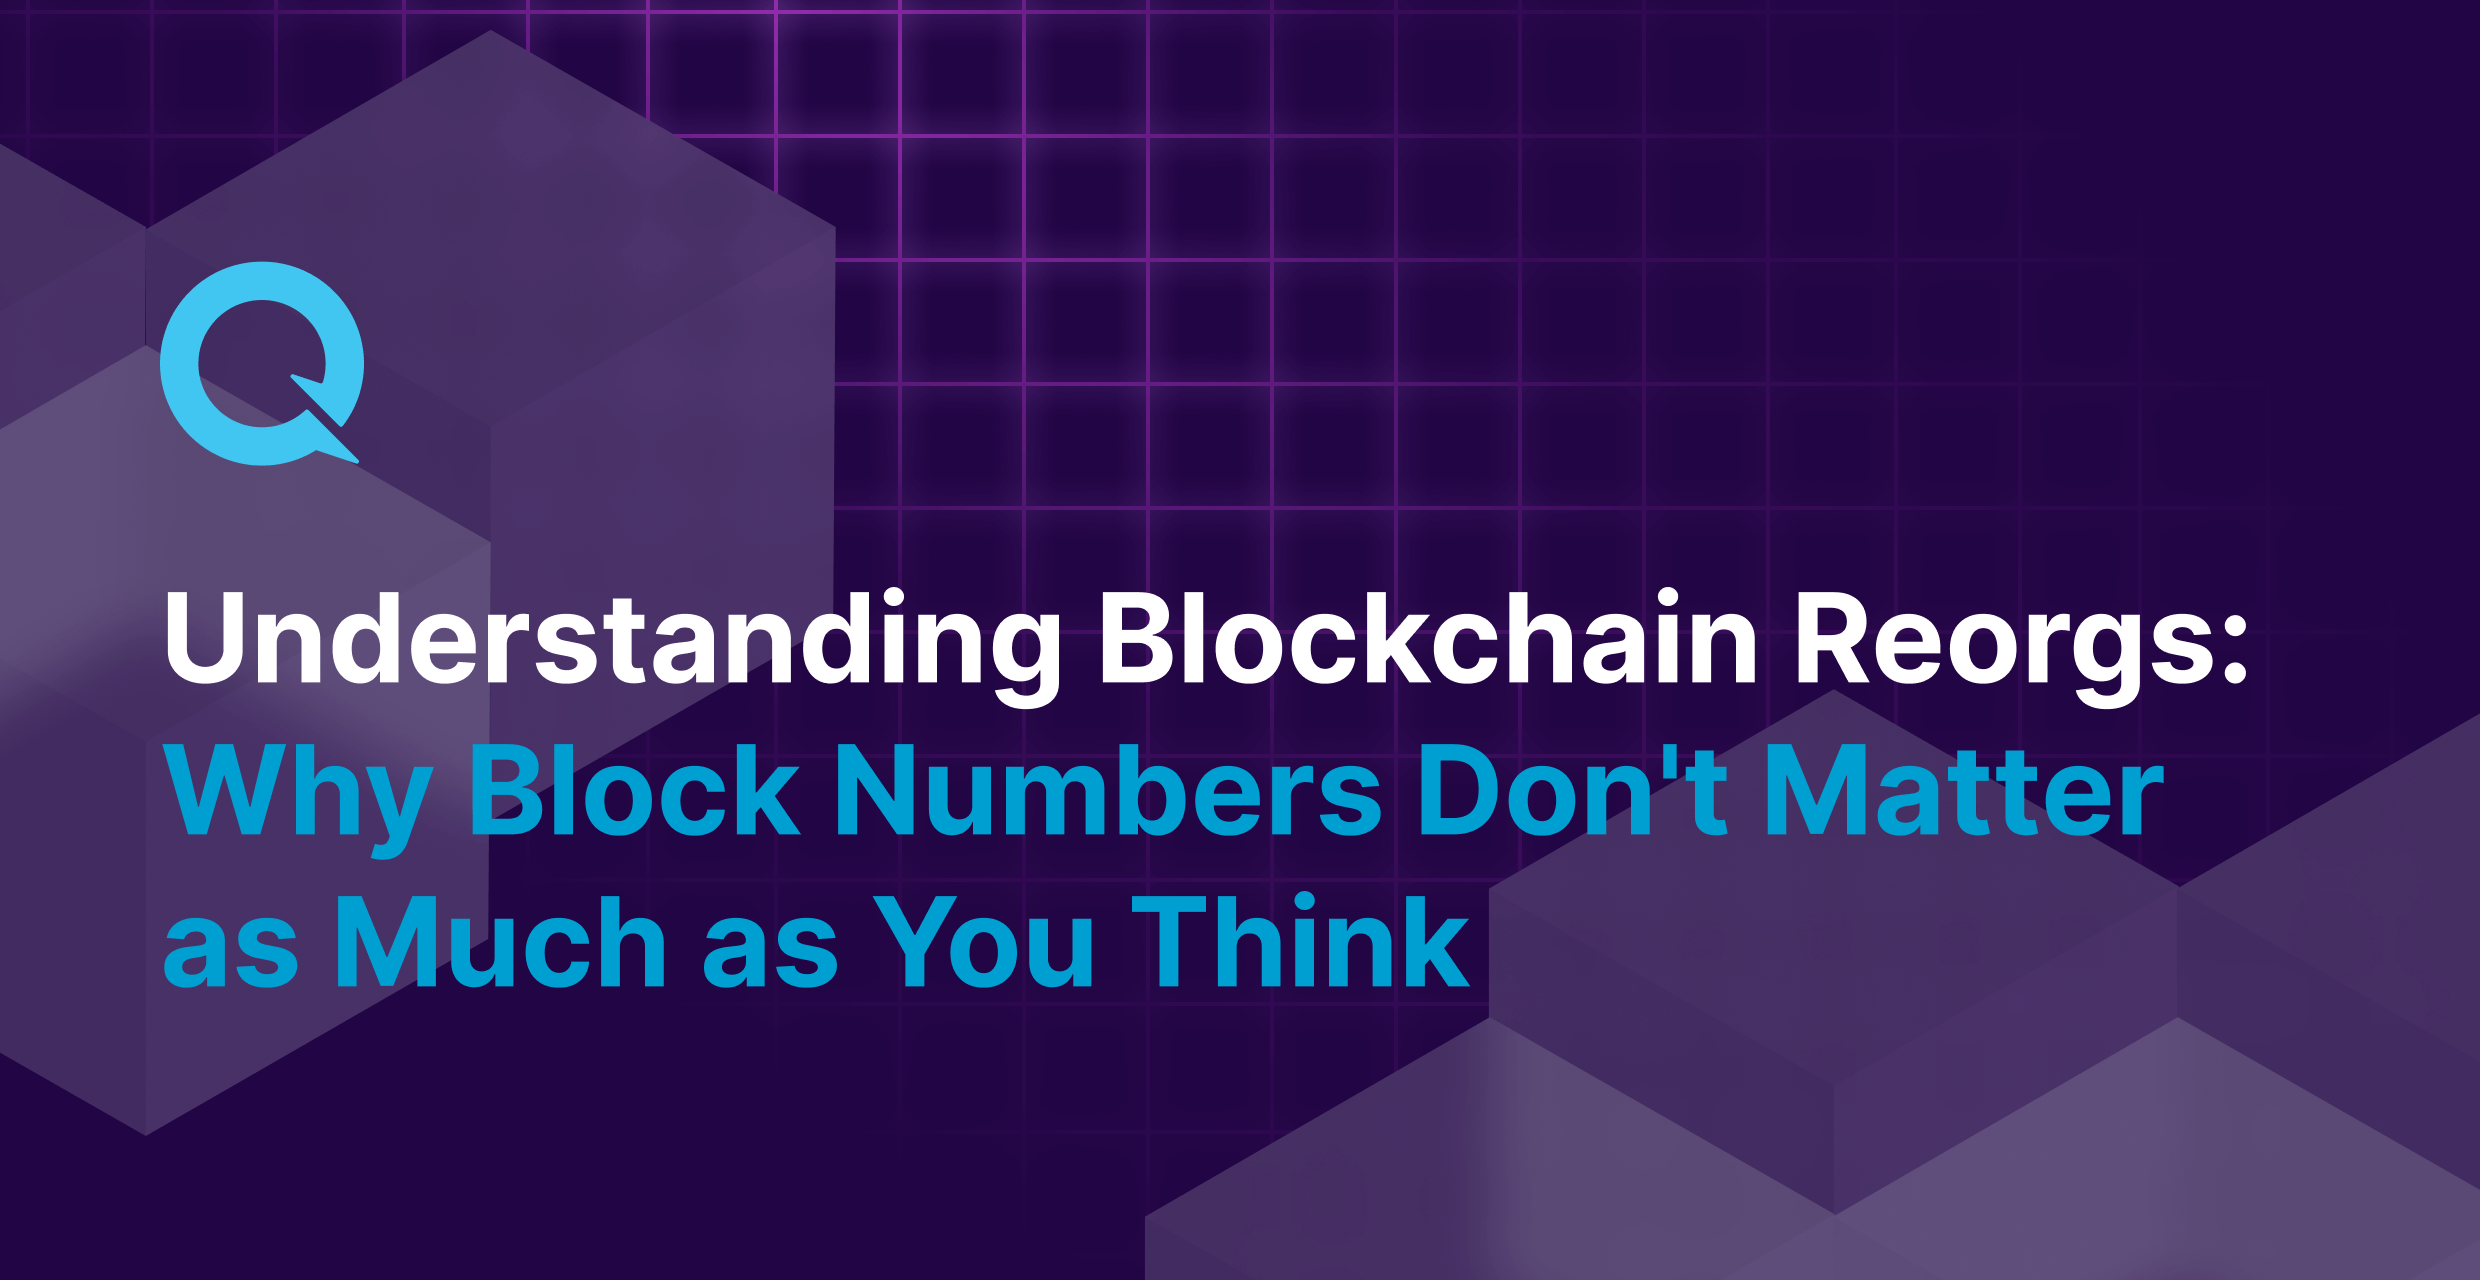 Understanding Blockchain Reorgs: Why Block Numbers Don't Matter as Much as You Think